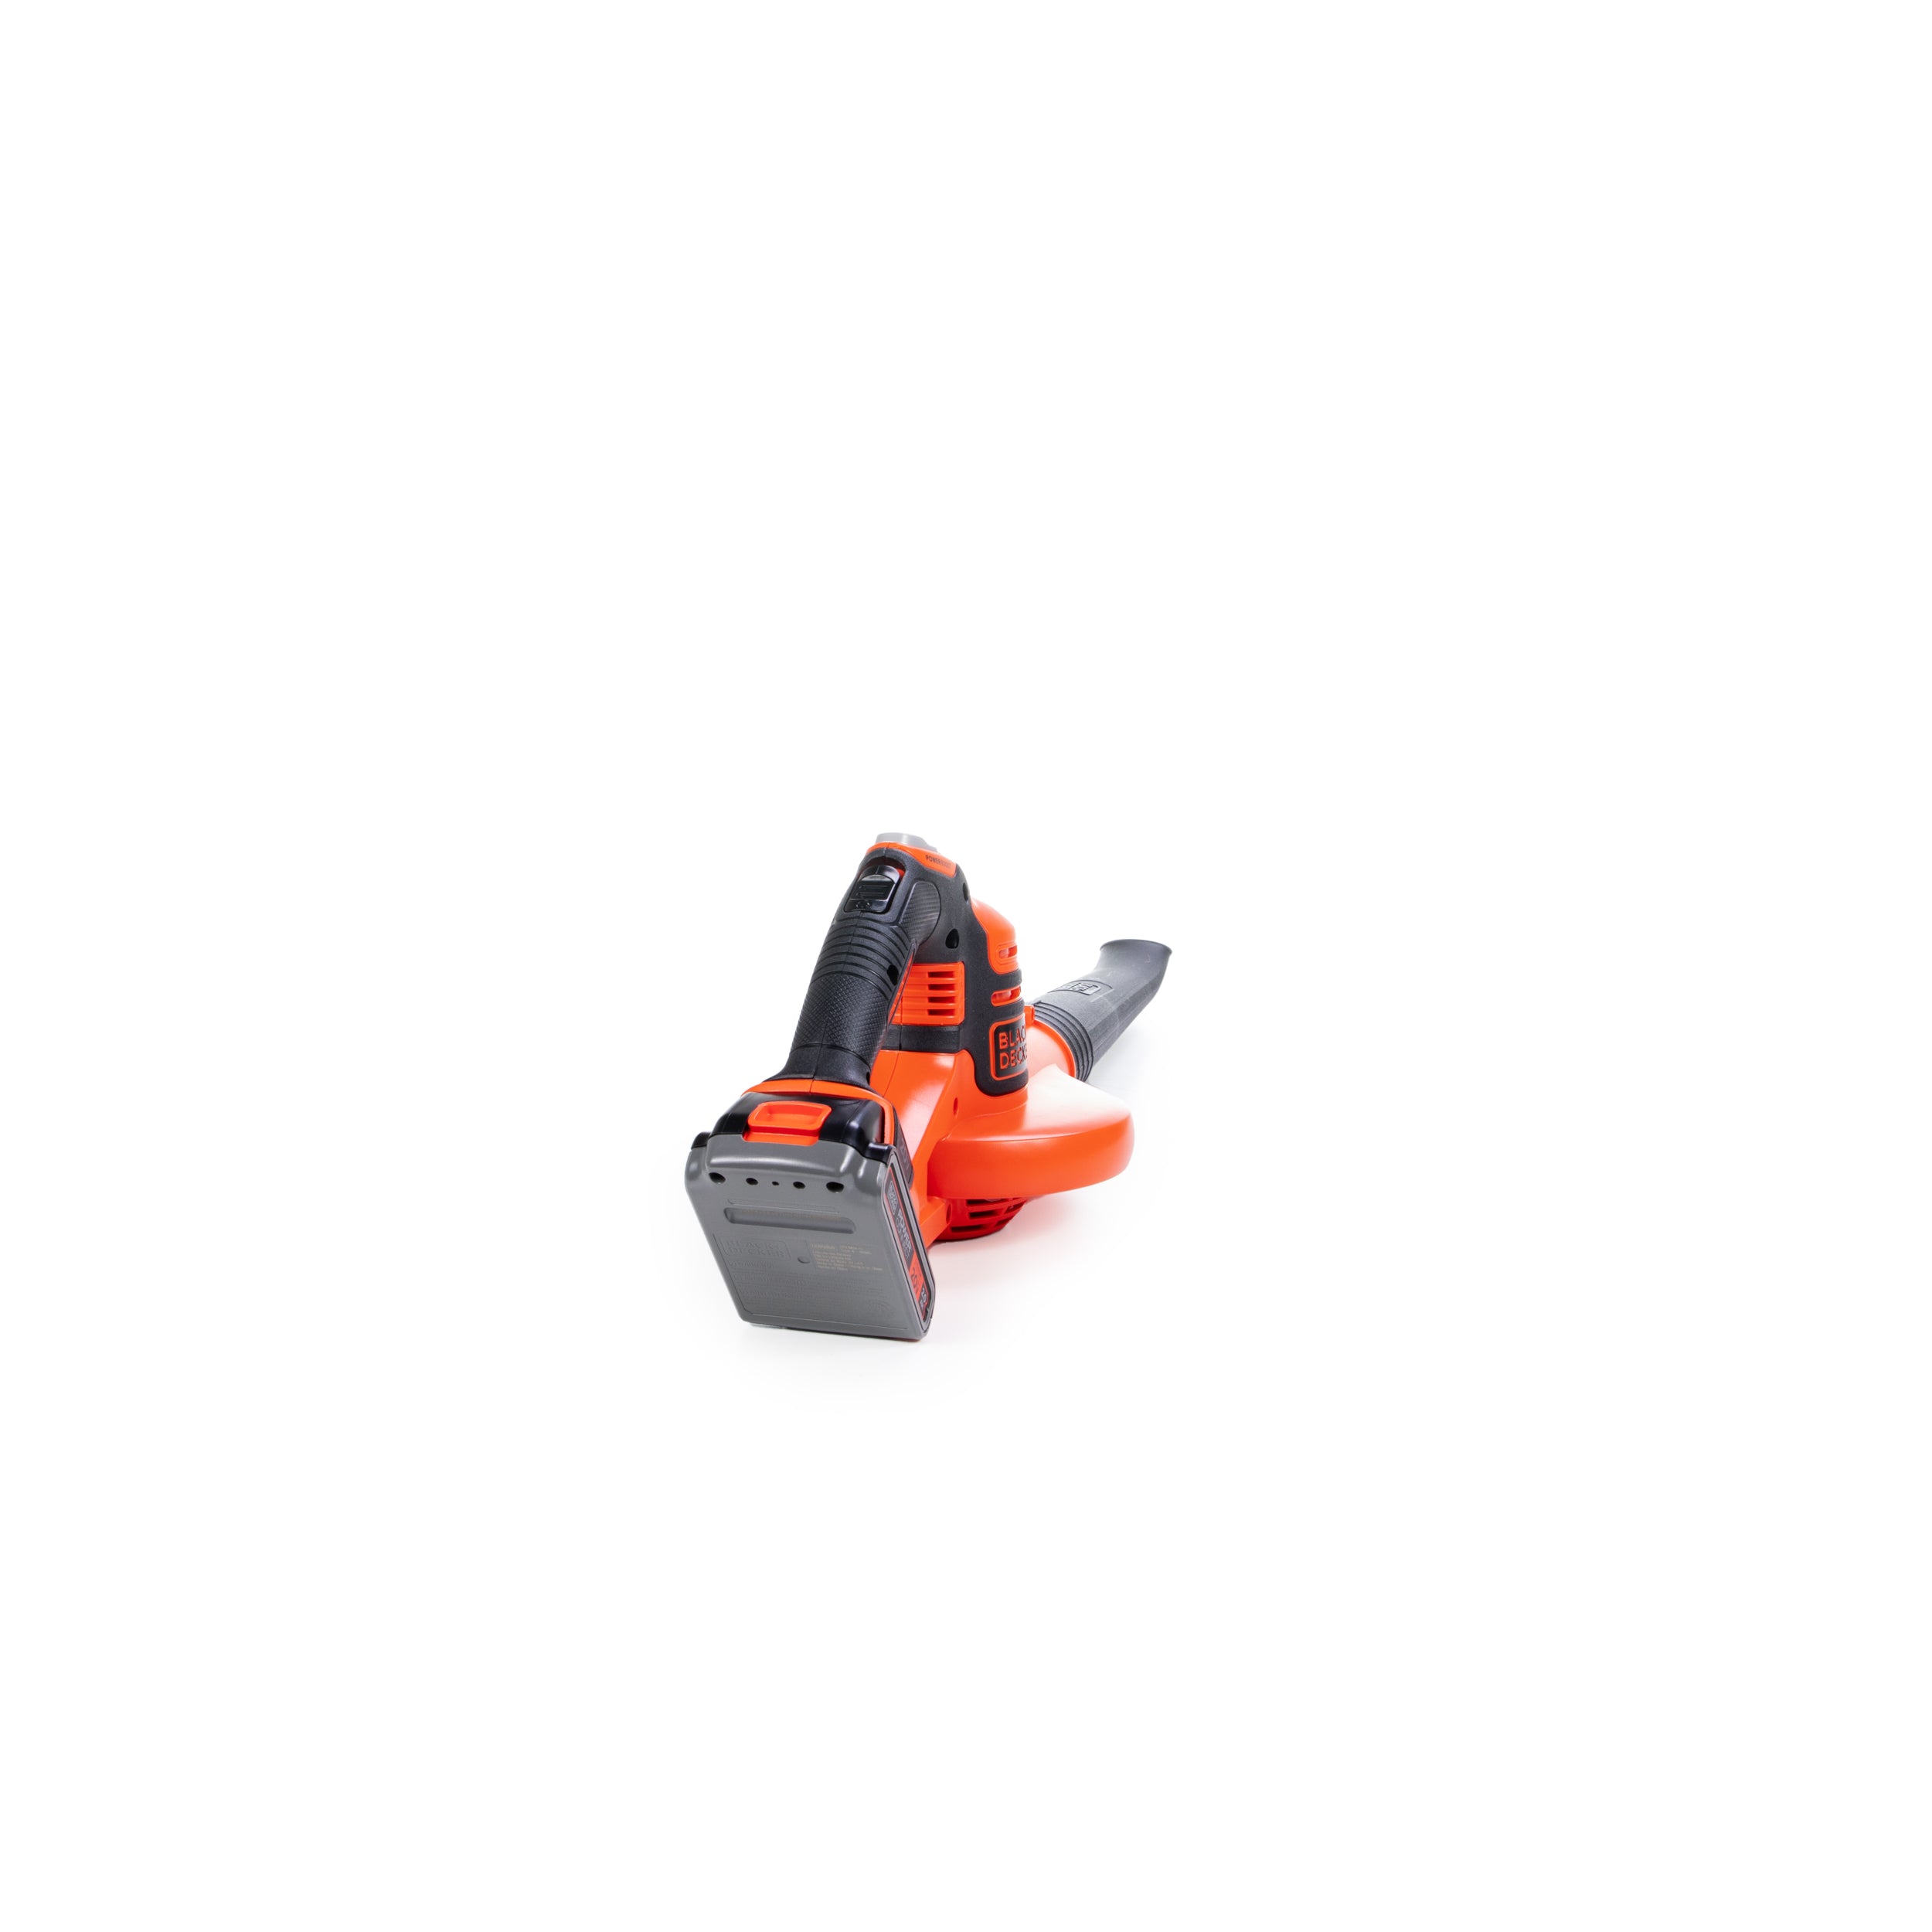  BLACK+DECKER 20V MAX* Cordless Sweeper with Power Boost  (LSW321) : Home & Kitchen